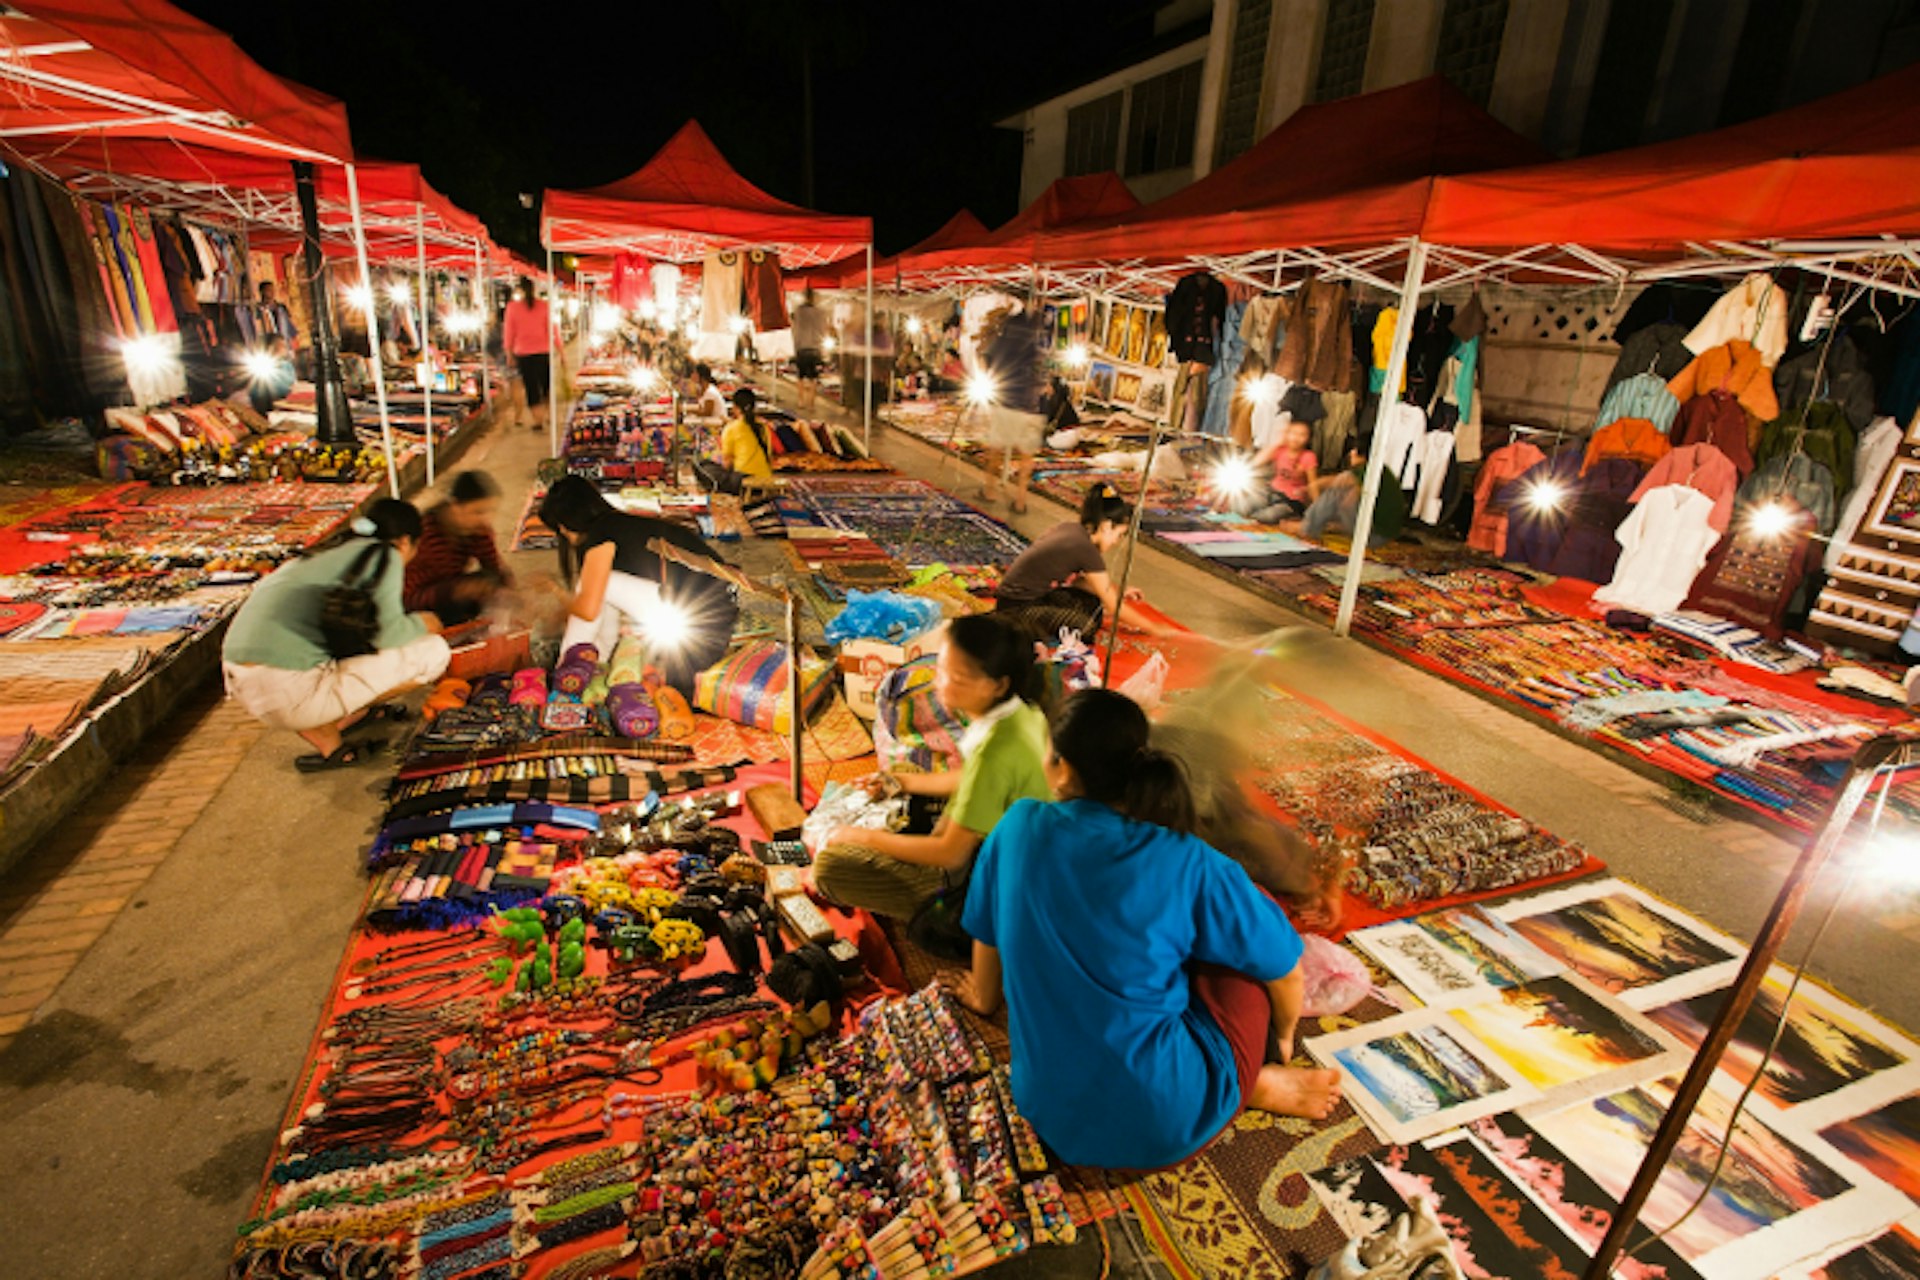 The laidback night market is as hectic as it gets in lovely Luang Prabang. Image by Anders Blomqvist / Lonely Planet Images / Getty Images